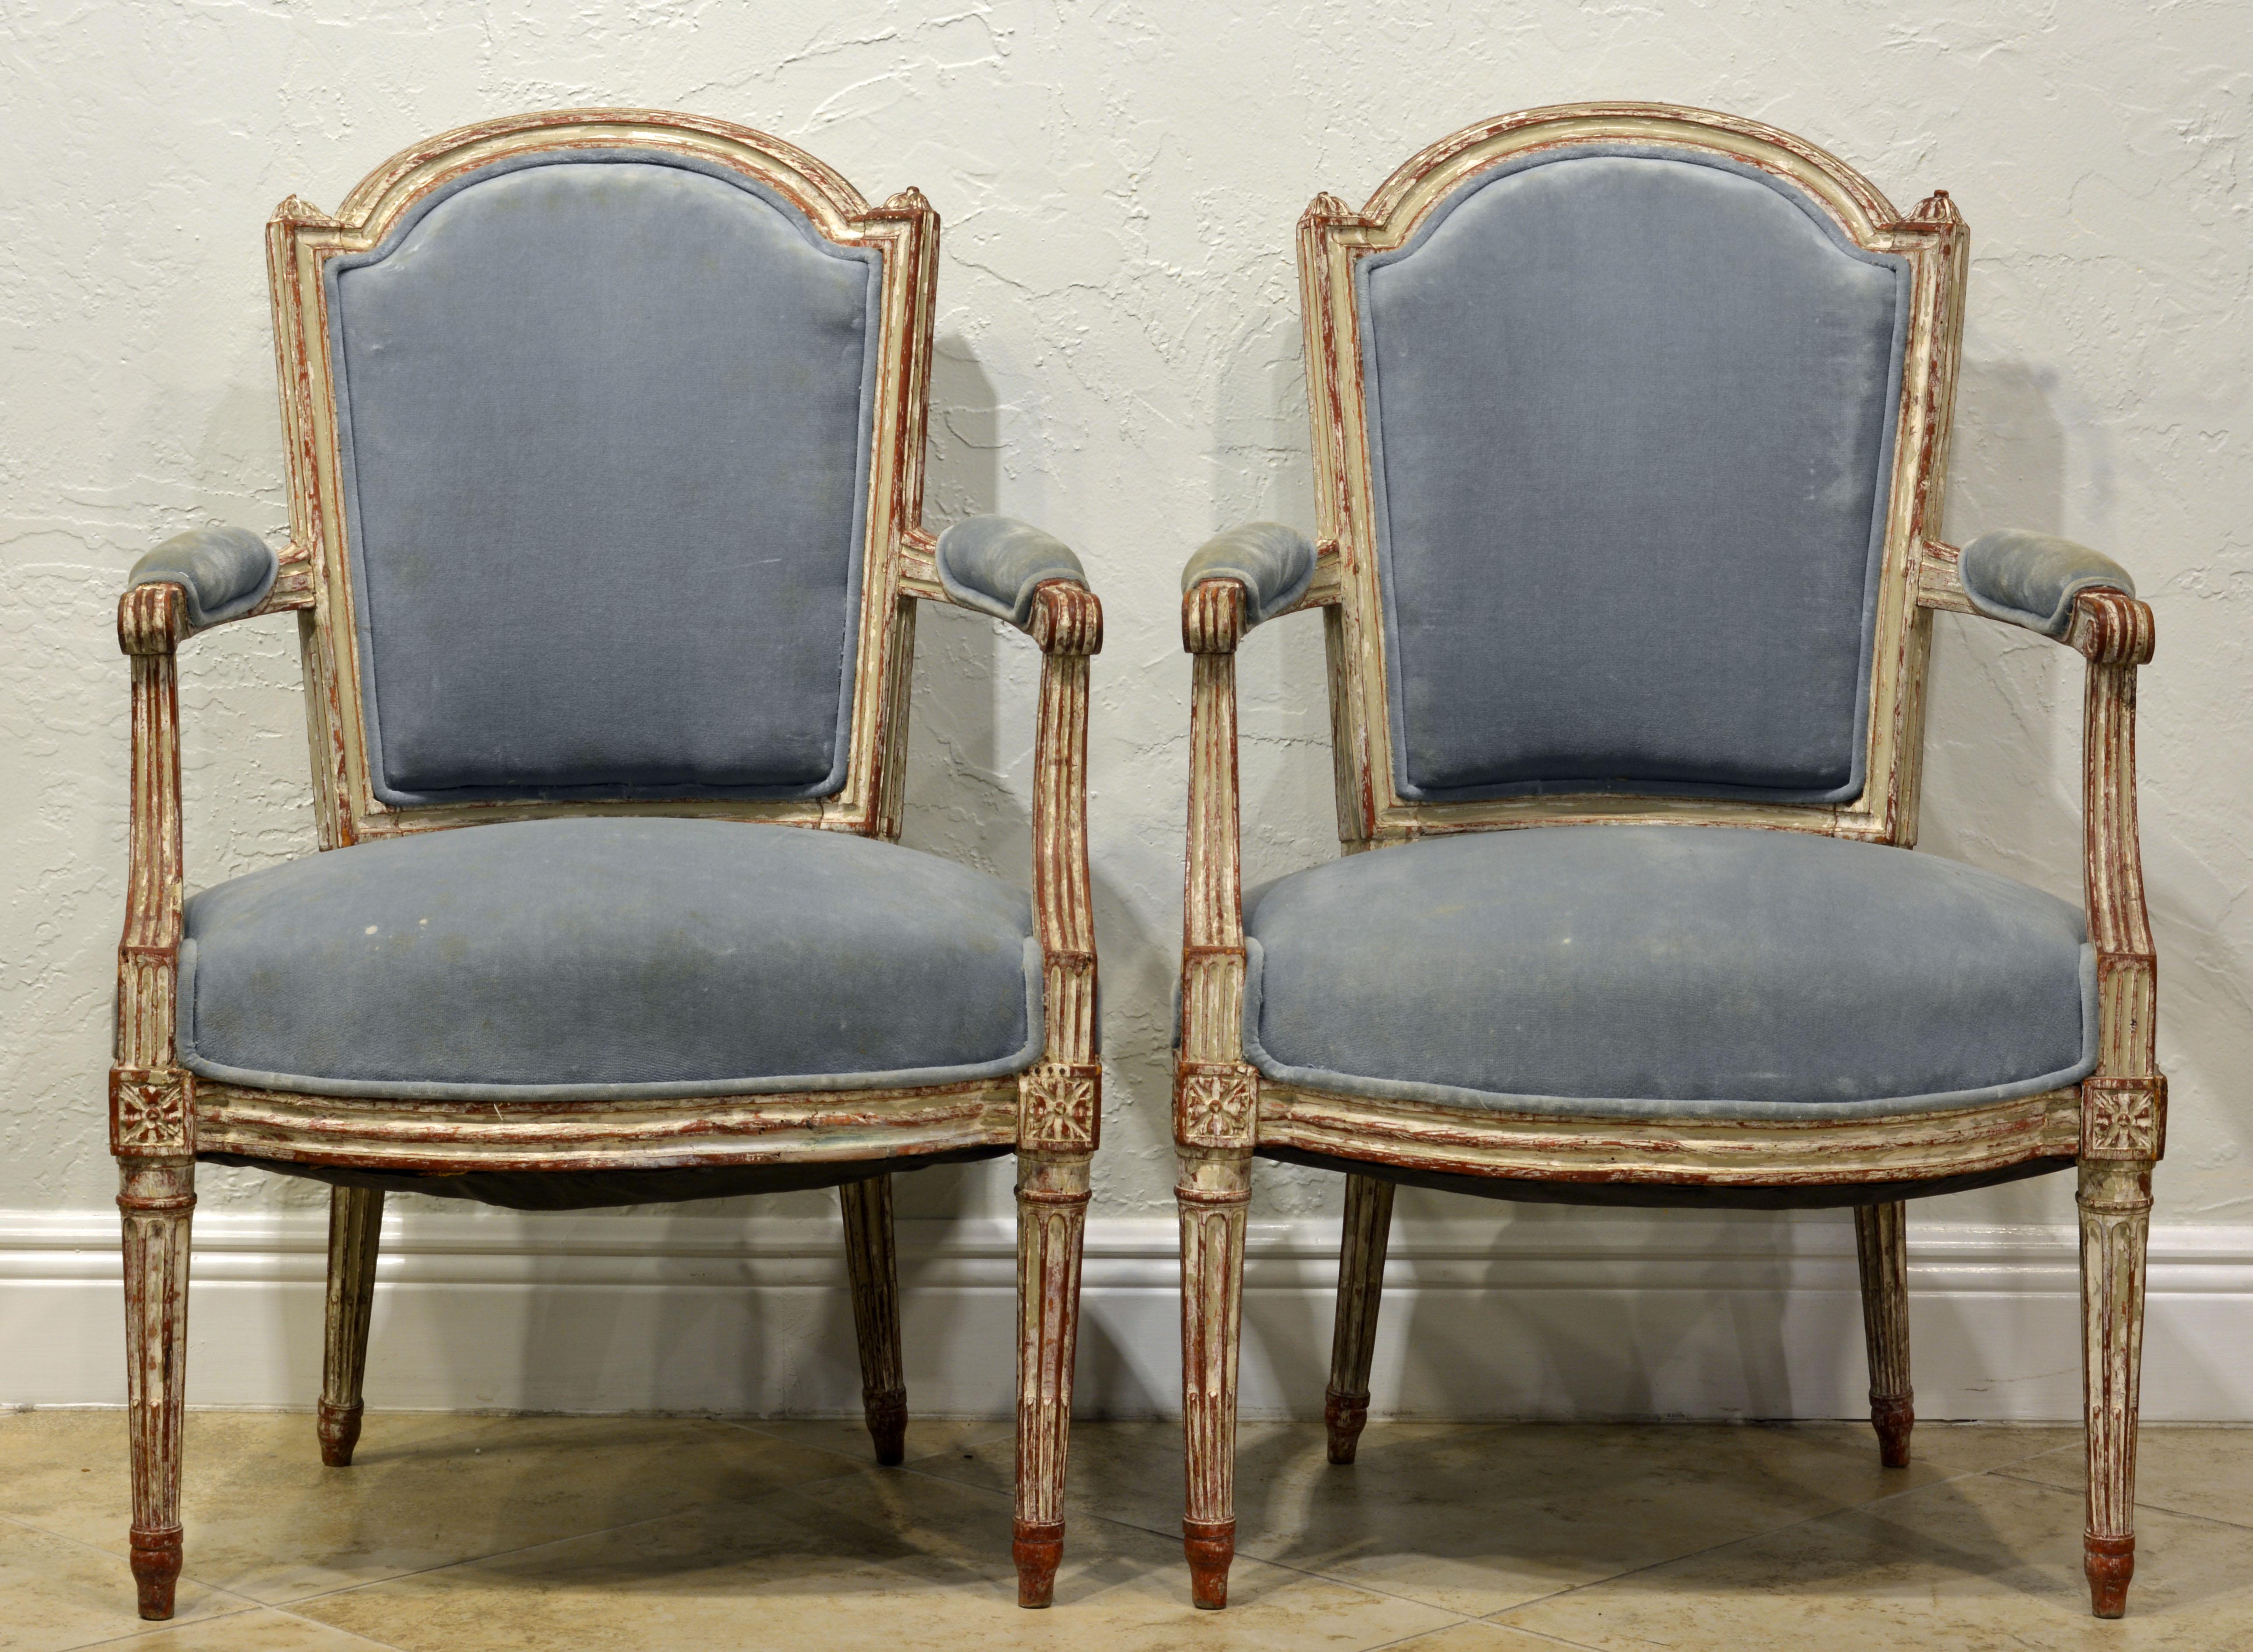 These very attractive French carved and painted armchairs dating to the Louis XVI period feature upholstered seats, armrests and backs in wonderfully detailed painted frames. The whitish paint shows decorative wear exposing underlying layers.